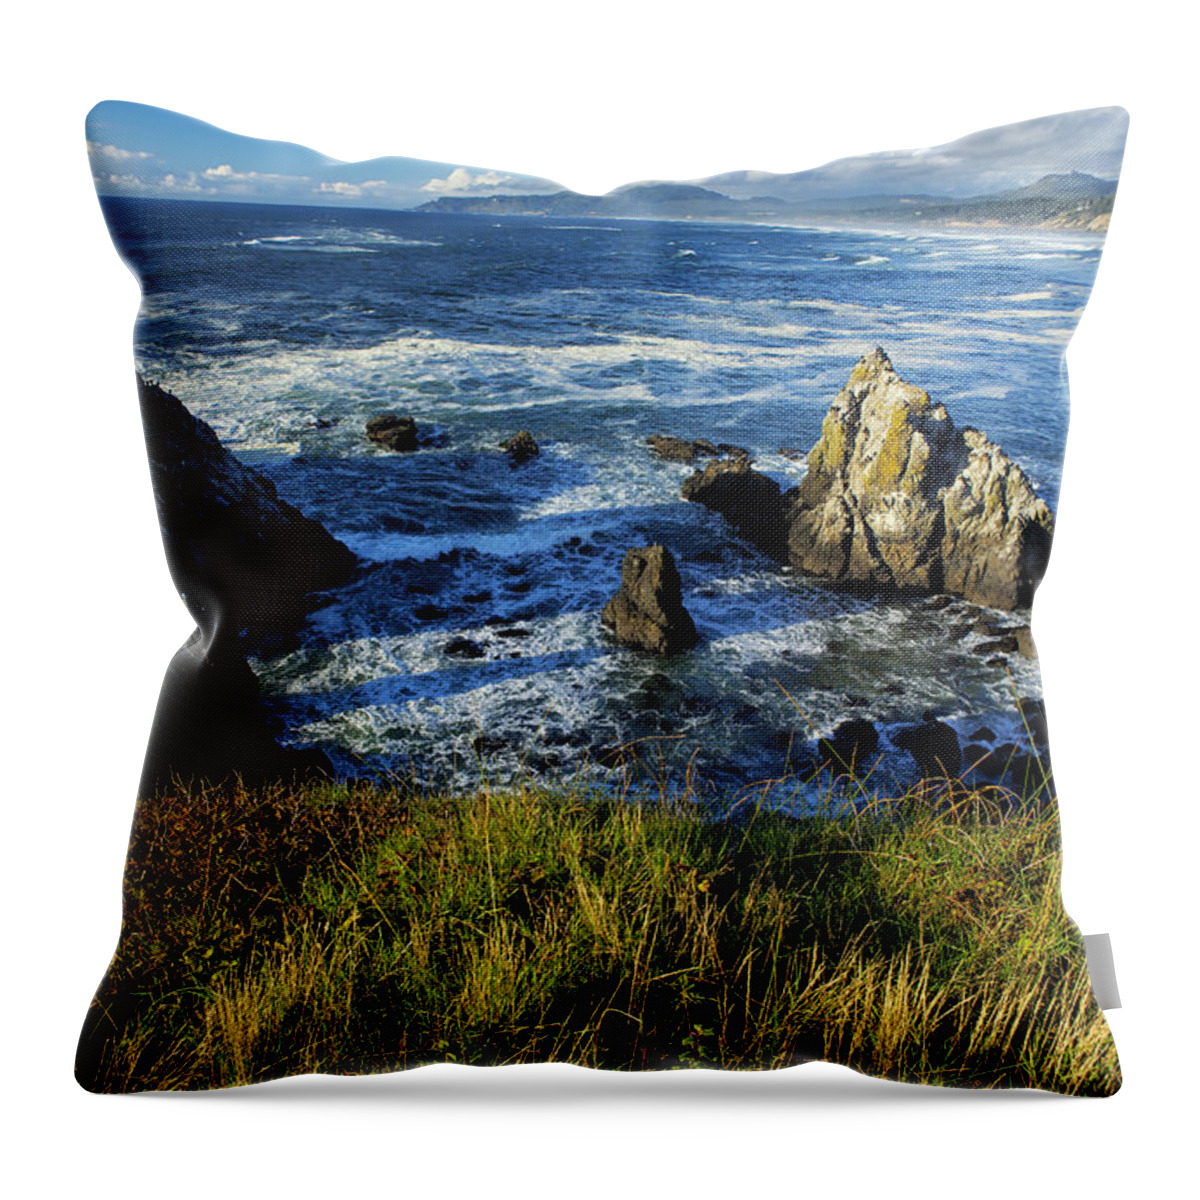 Sea Throw Pillow featuring the photograph Coming Together by Belinda Greb